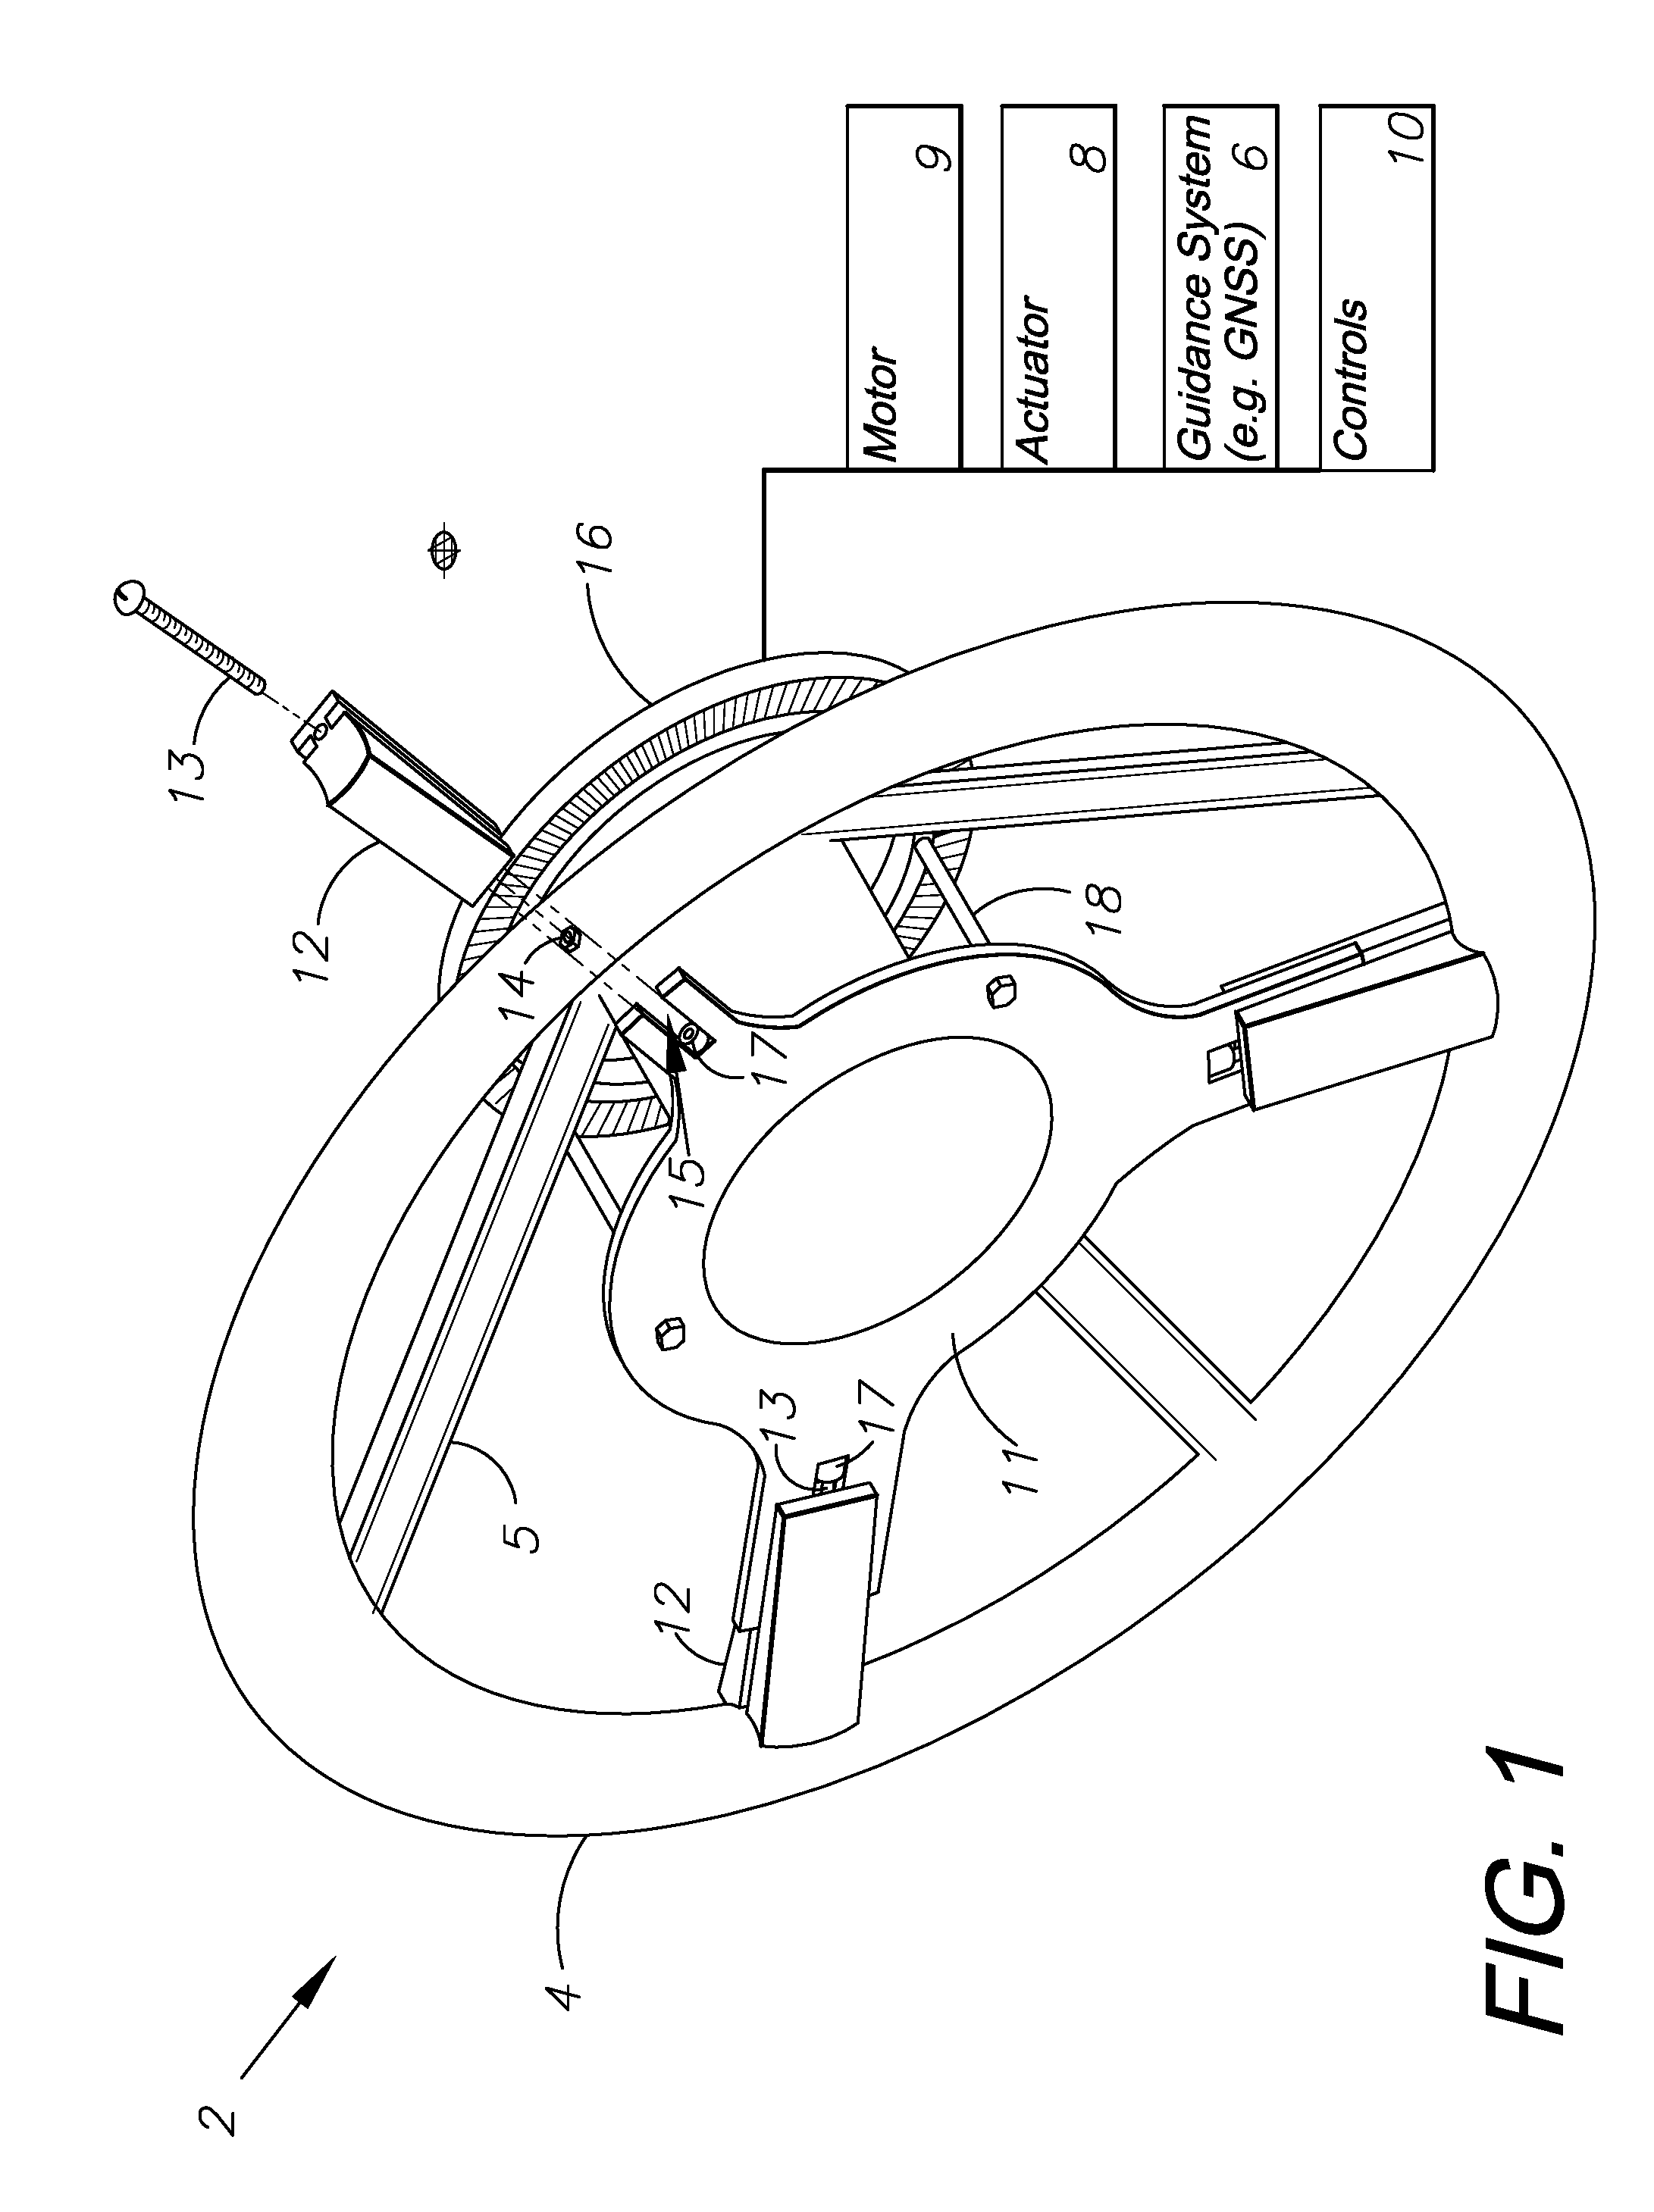 Apparatus and method to mount steering actuator